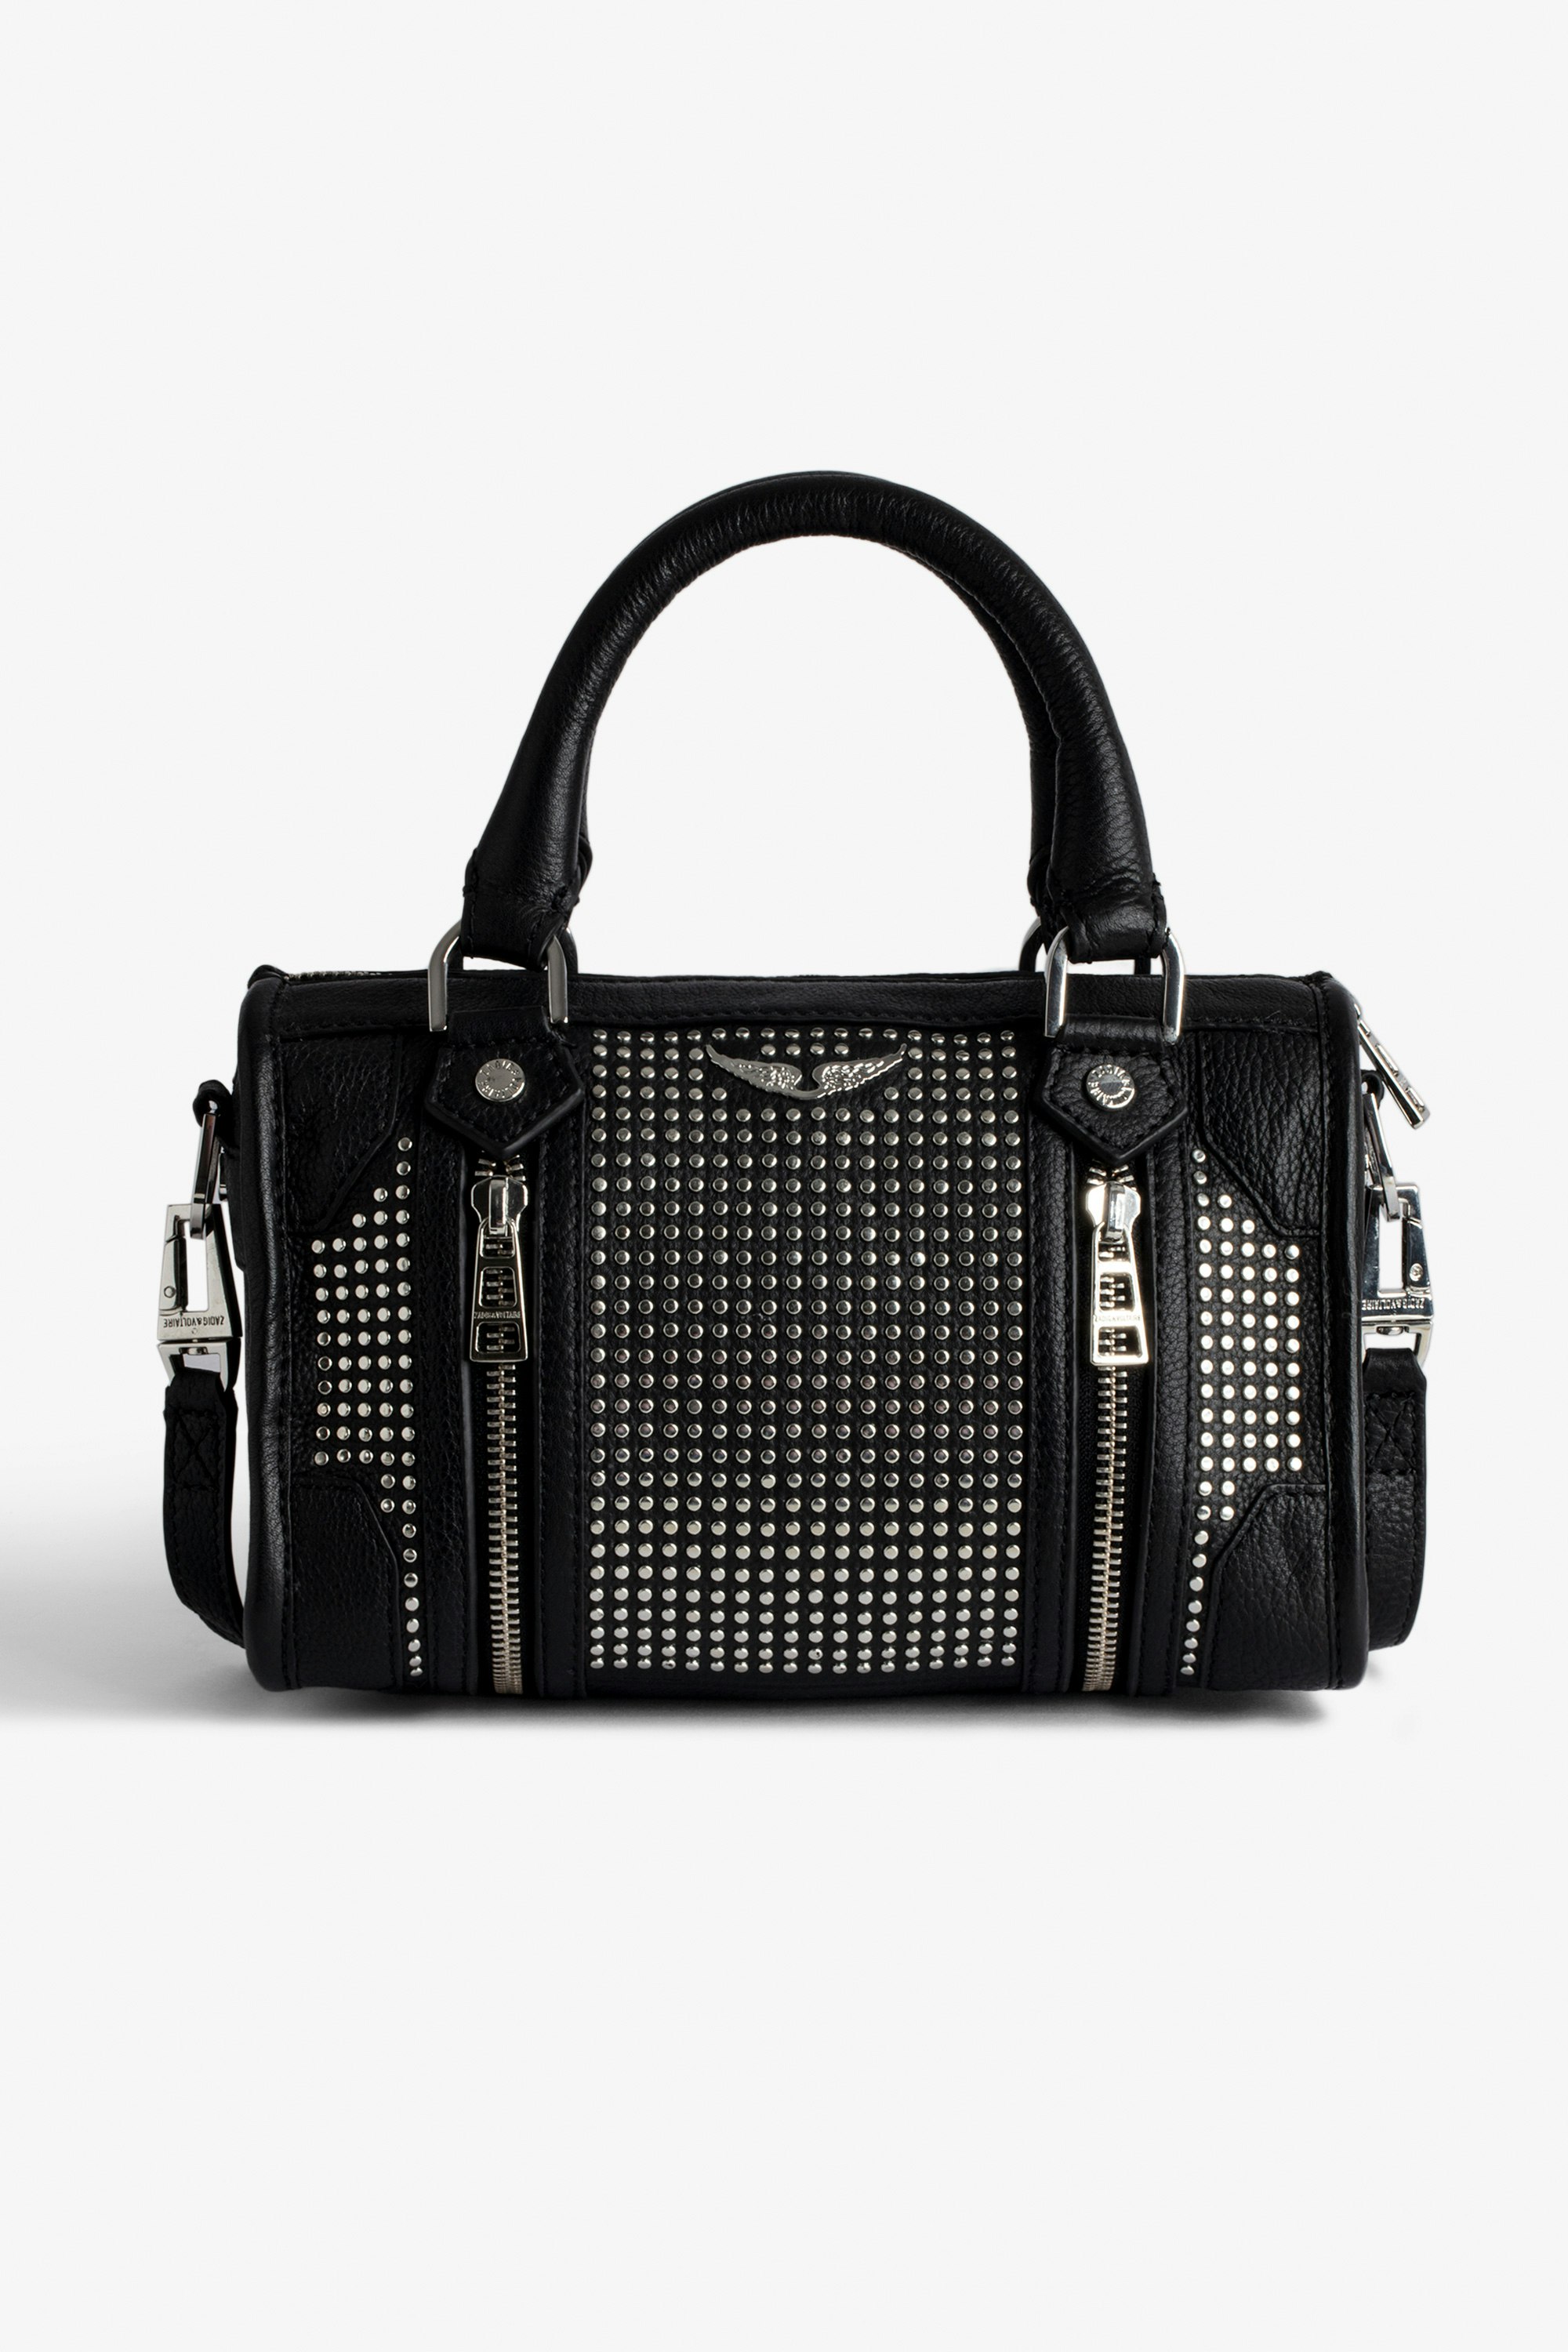 XS Sunny #2 Bag Women’s small zipped bag in black leather with studs and a shoulder strap.